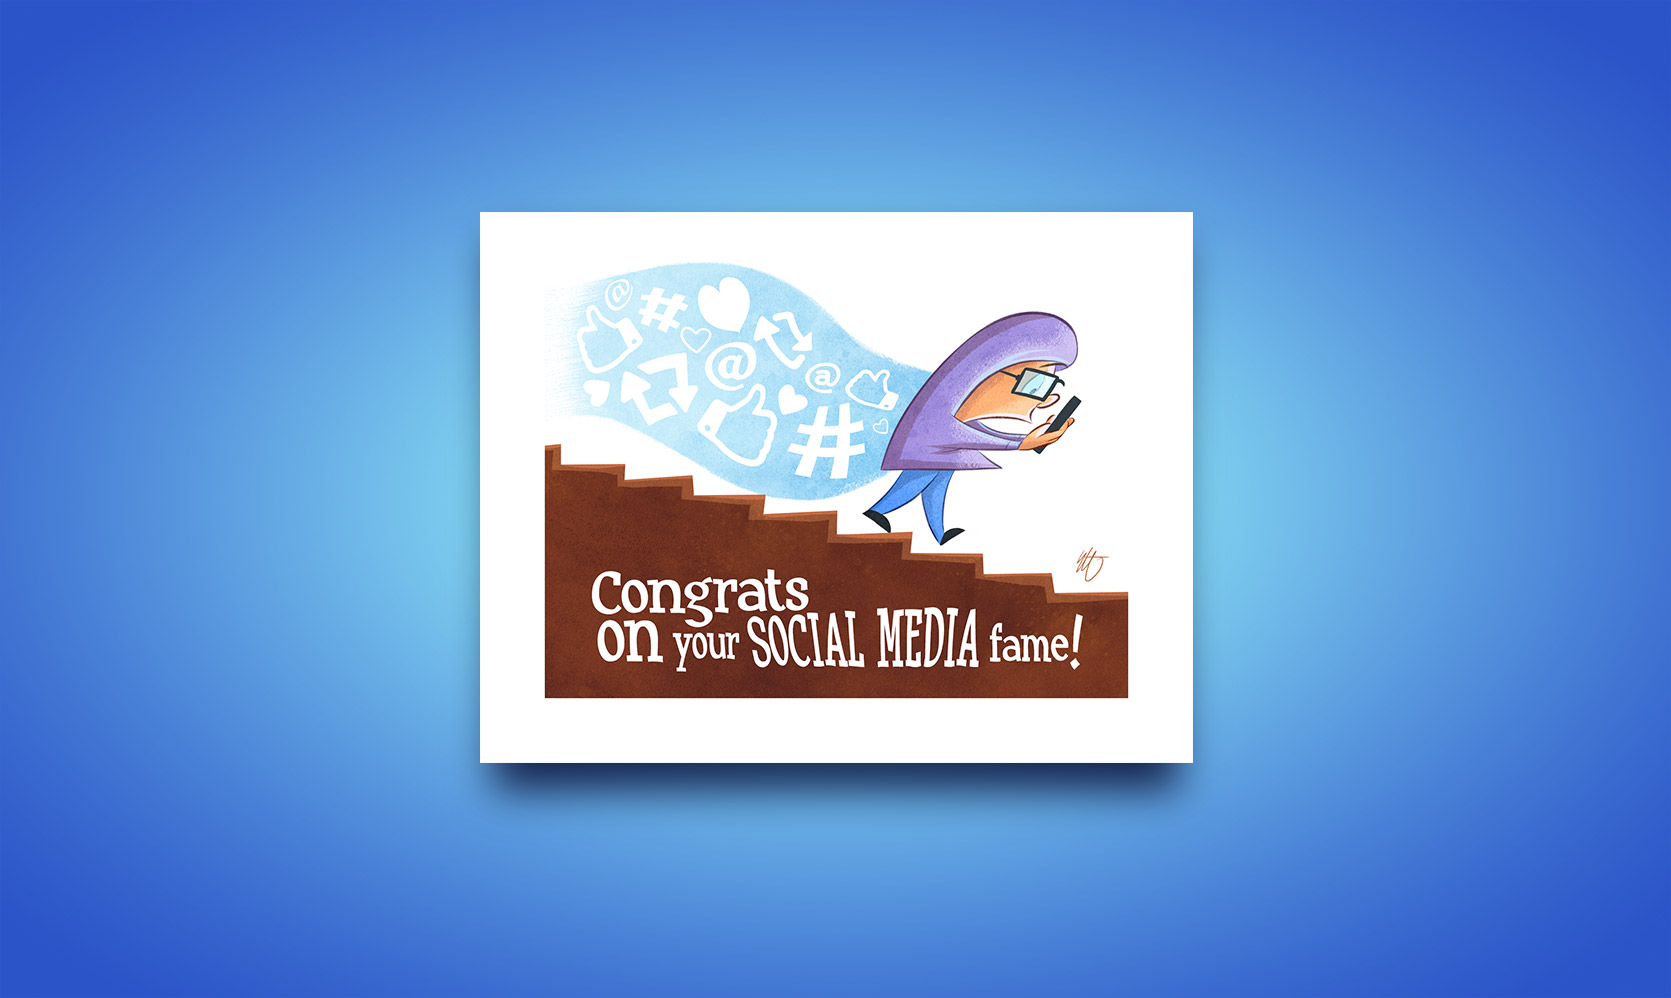 Congrats on your social media fame – Greeting card design available on Etsy